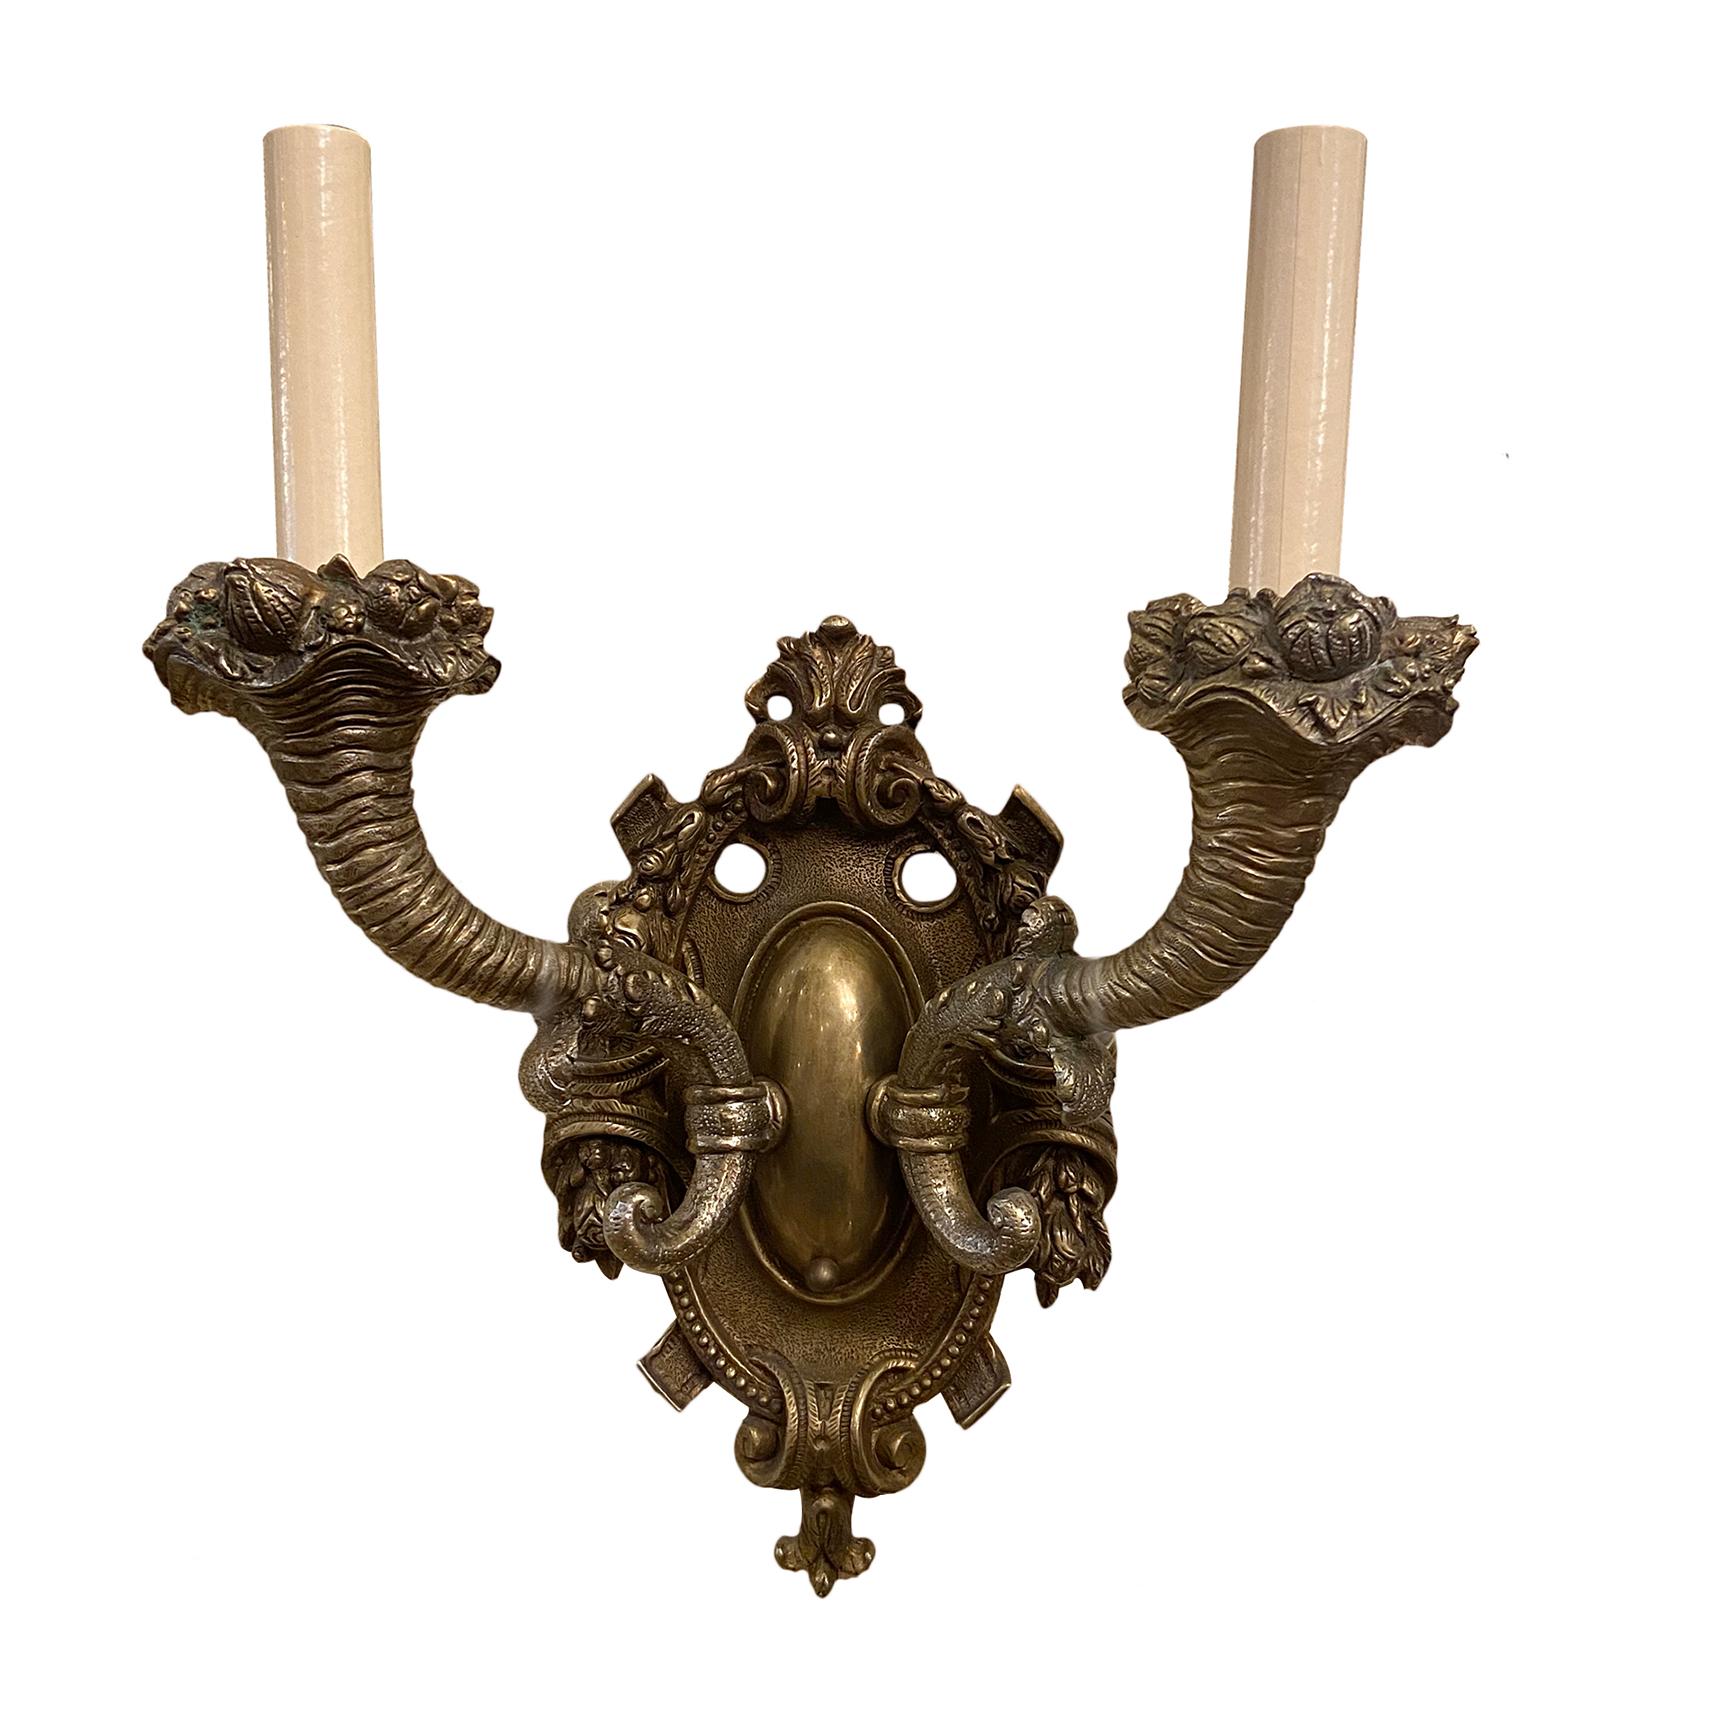 Set of four circa 1920's French cast bronze sconces with original patina.

Measurements:
Height: 15.5